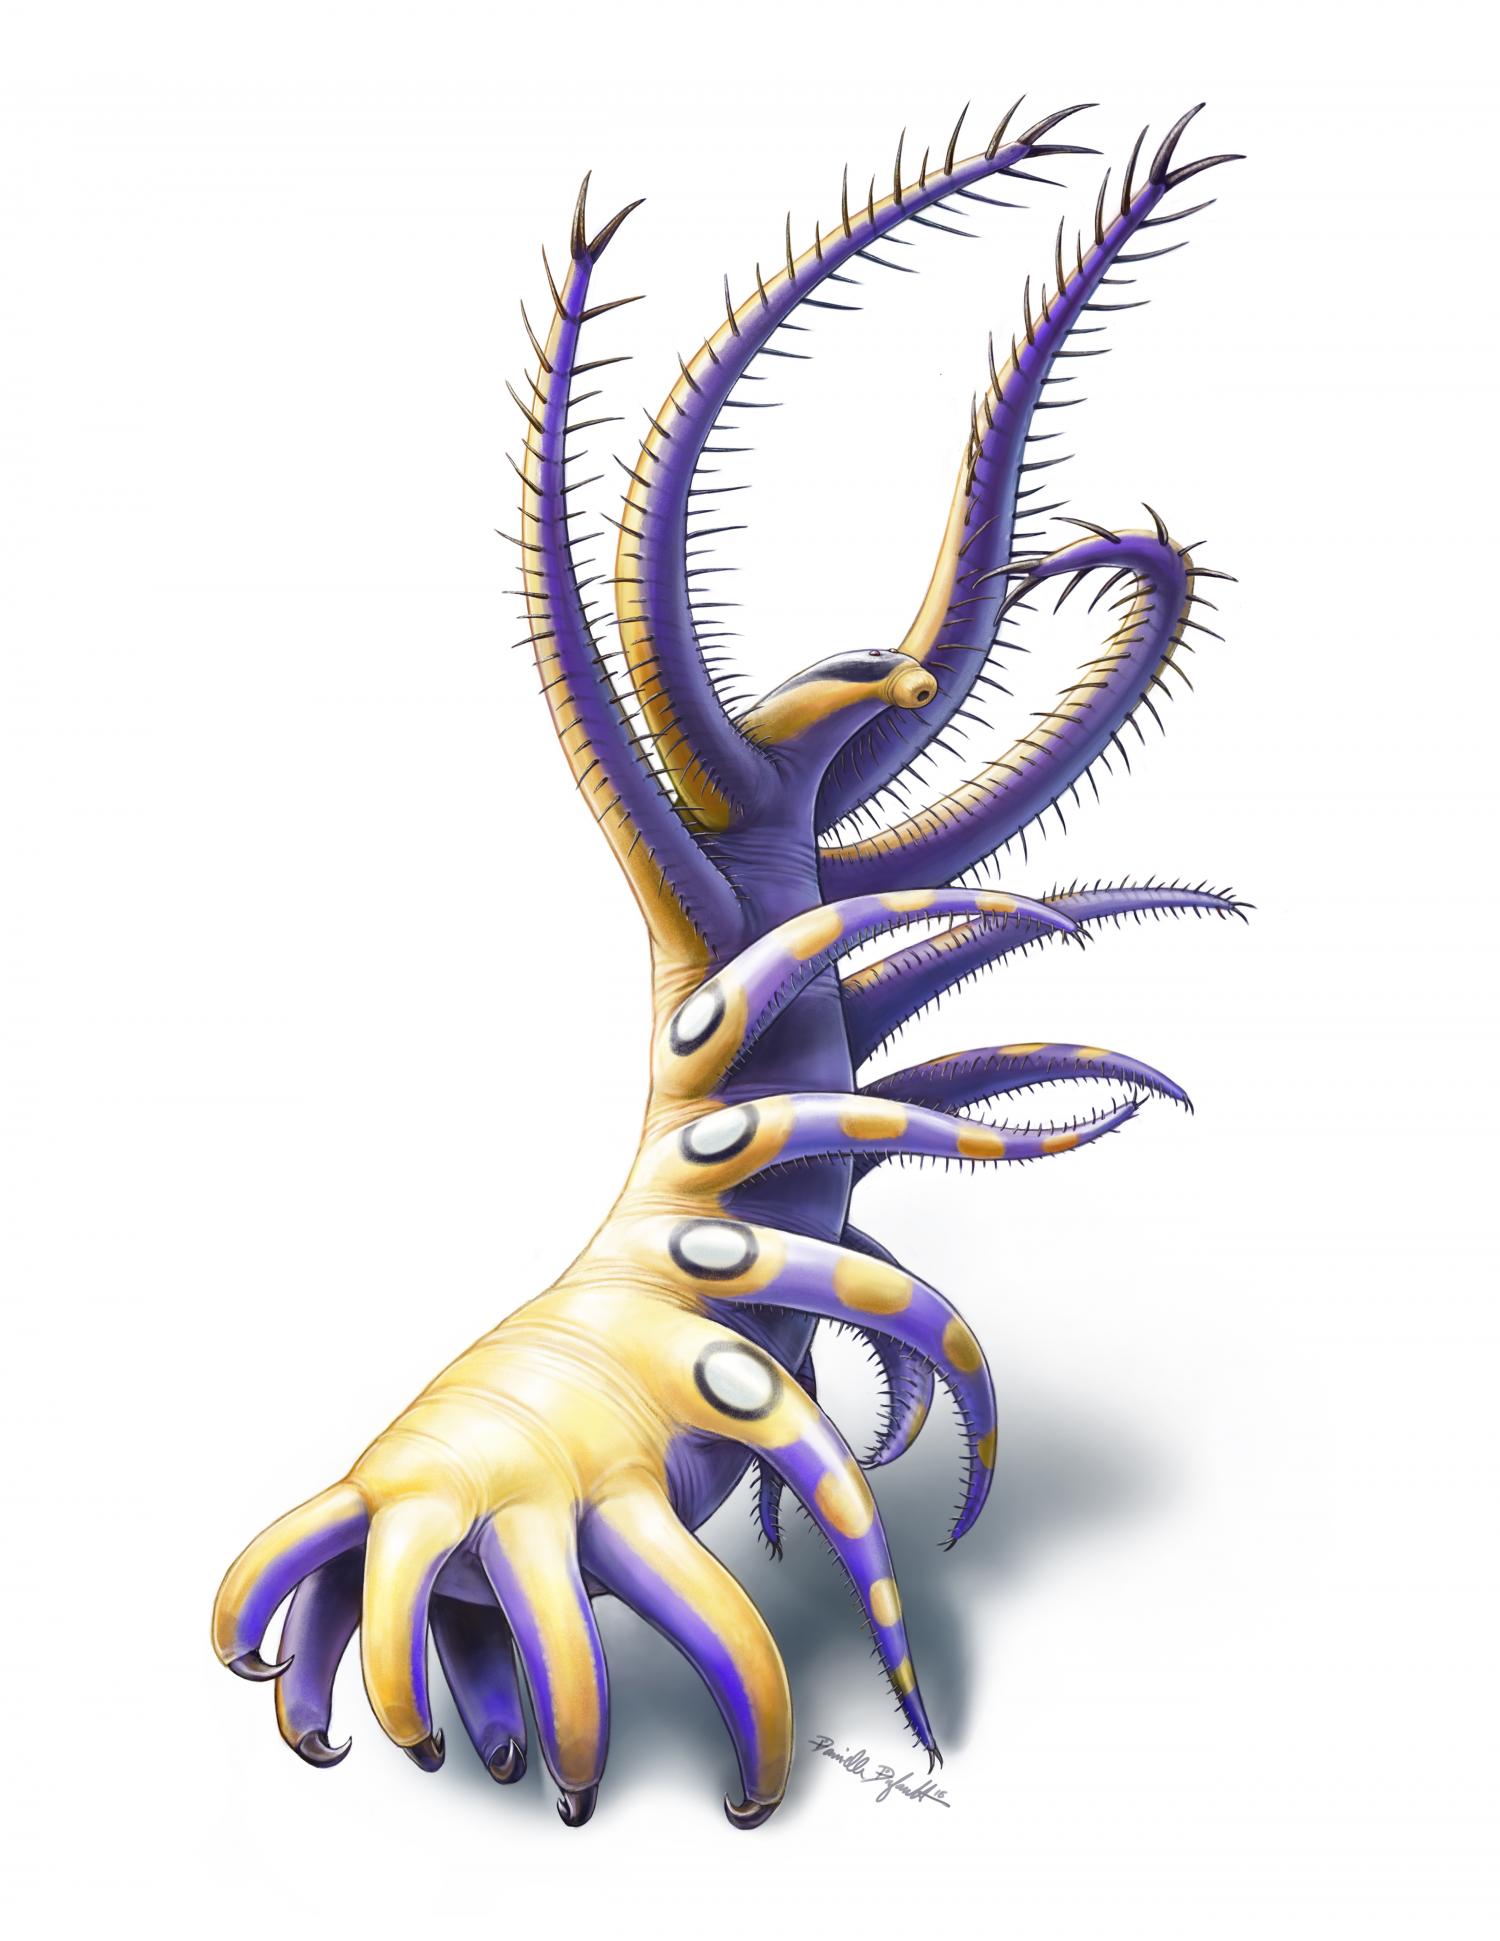 A scientificillustration of Ovatiovermis cribratusshows how this soft-bodied marine animal would have looked like with its front feeding limbs extended. Credit: Illustrated by Danielle Dufault, Royal Ontario Museum © Royal Ontario Museum